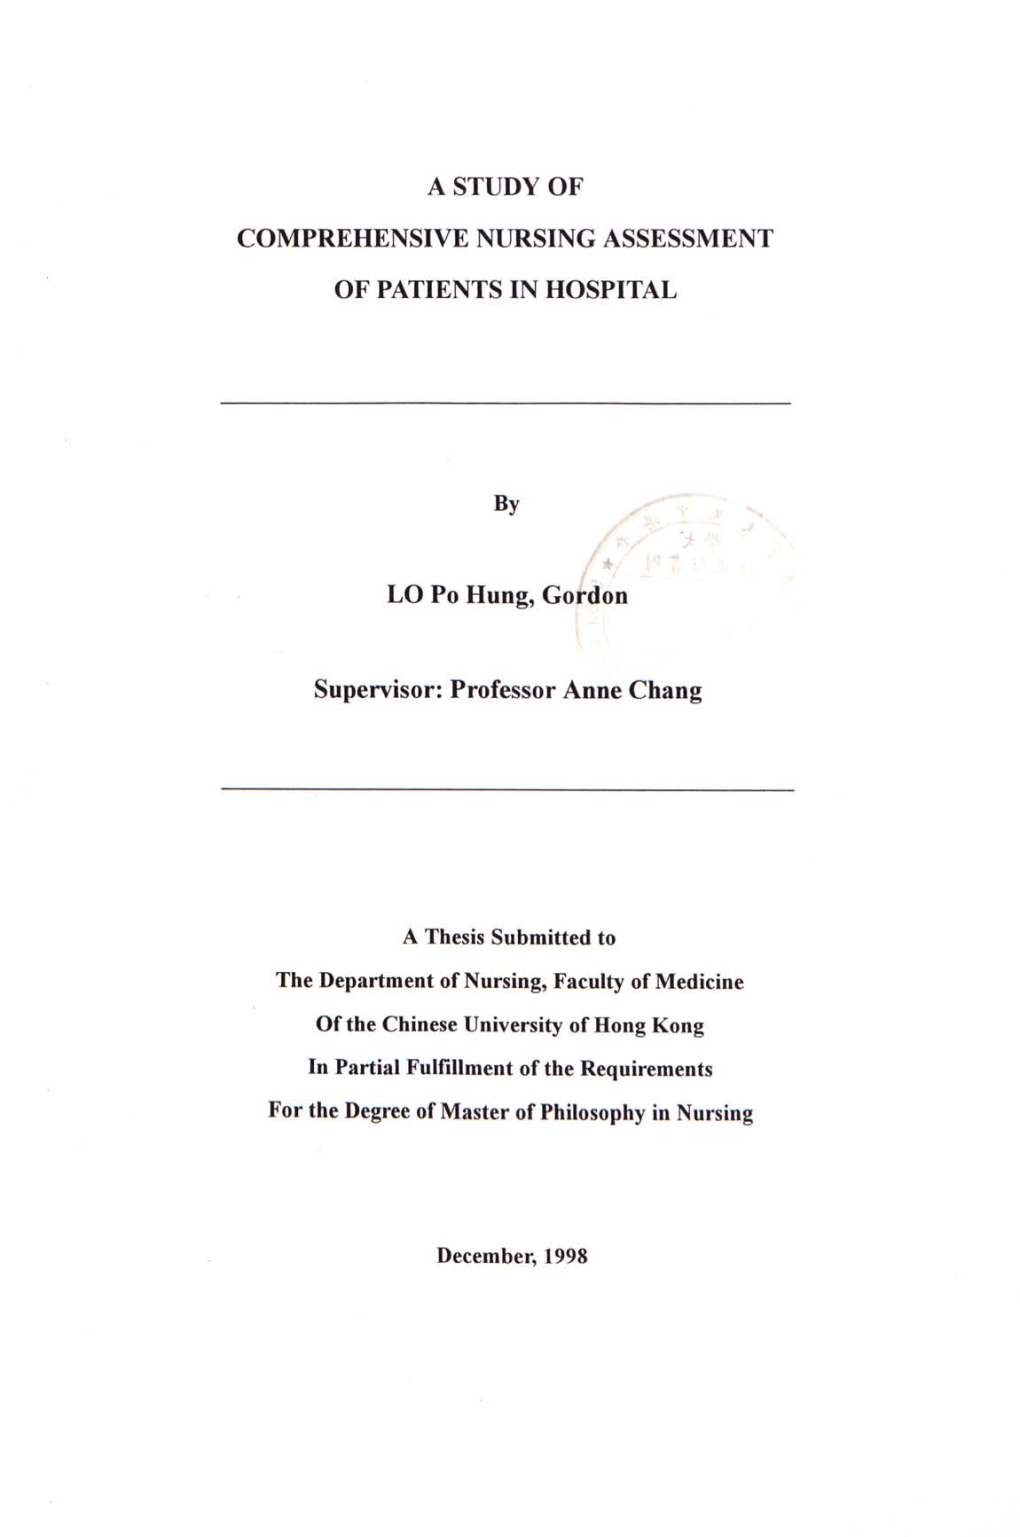 A STUDY of COMPREHENSIVE NURSING ASSESSMENT of PATIENTS in HOSPITAL by LO Po Hung, Gordon Supervisor